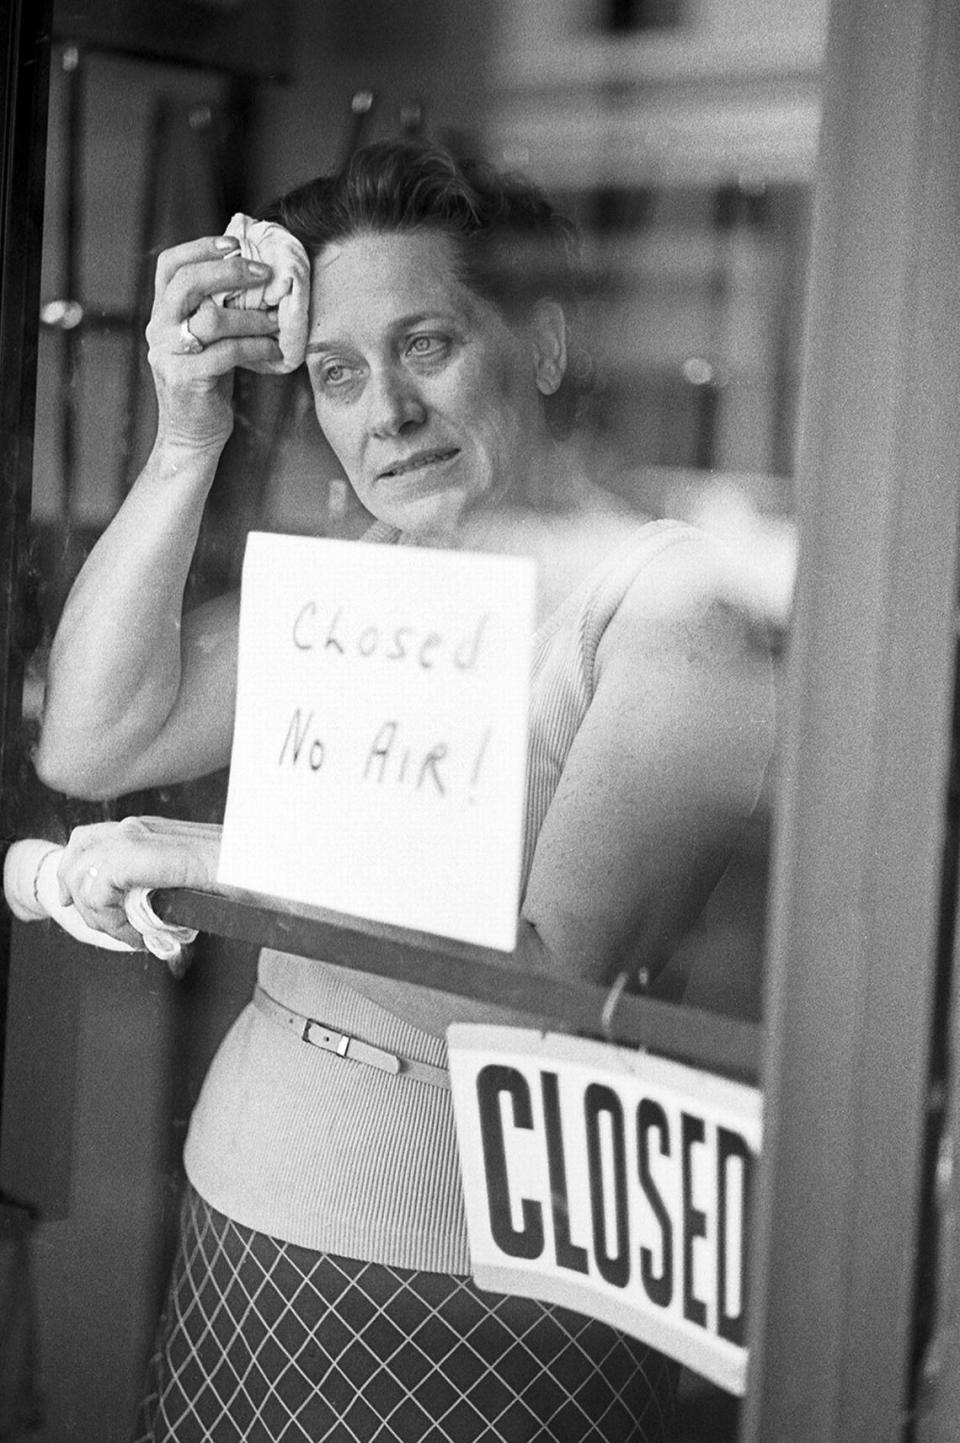 June 26, 1980: Maxine Harkridge, owner of Rusty’s Hot Dogs, stands next to a sign reading “Closed, no air!” and wipes sweat off her brow while waiting for the air conditioning repair person. Vince Heptig] Vince Heptig/Fort Worth Star-Telegram archive/UT Arlington Special Collections